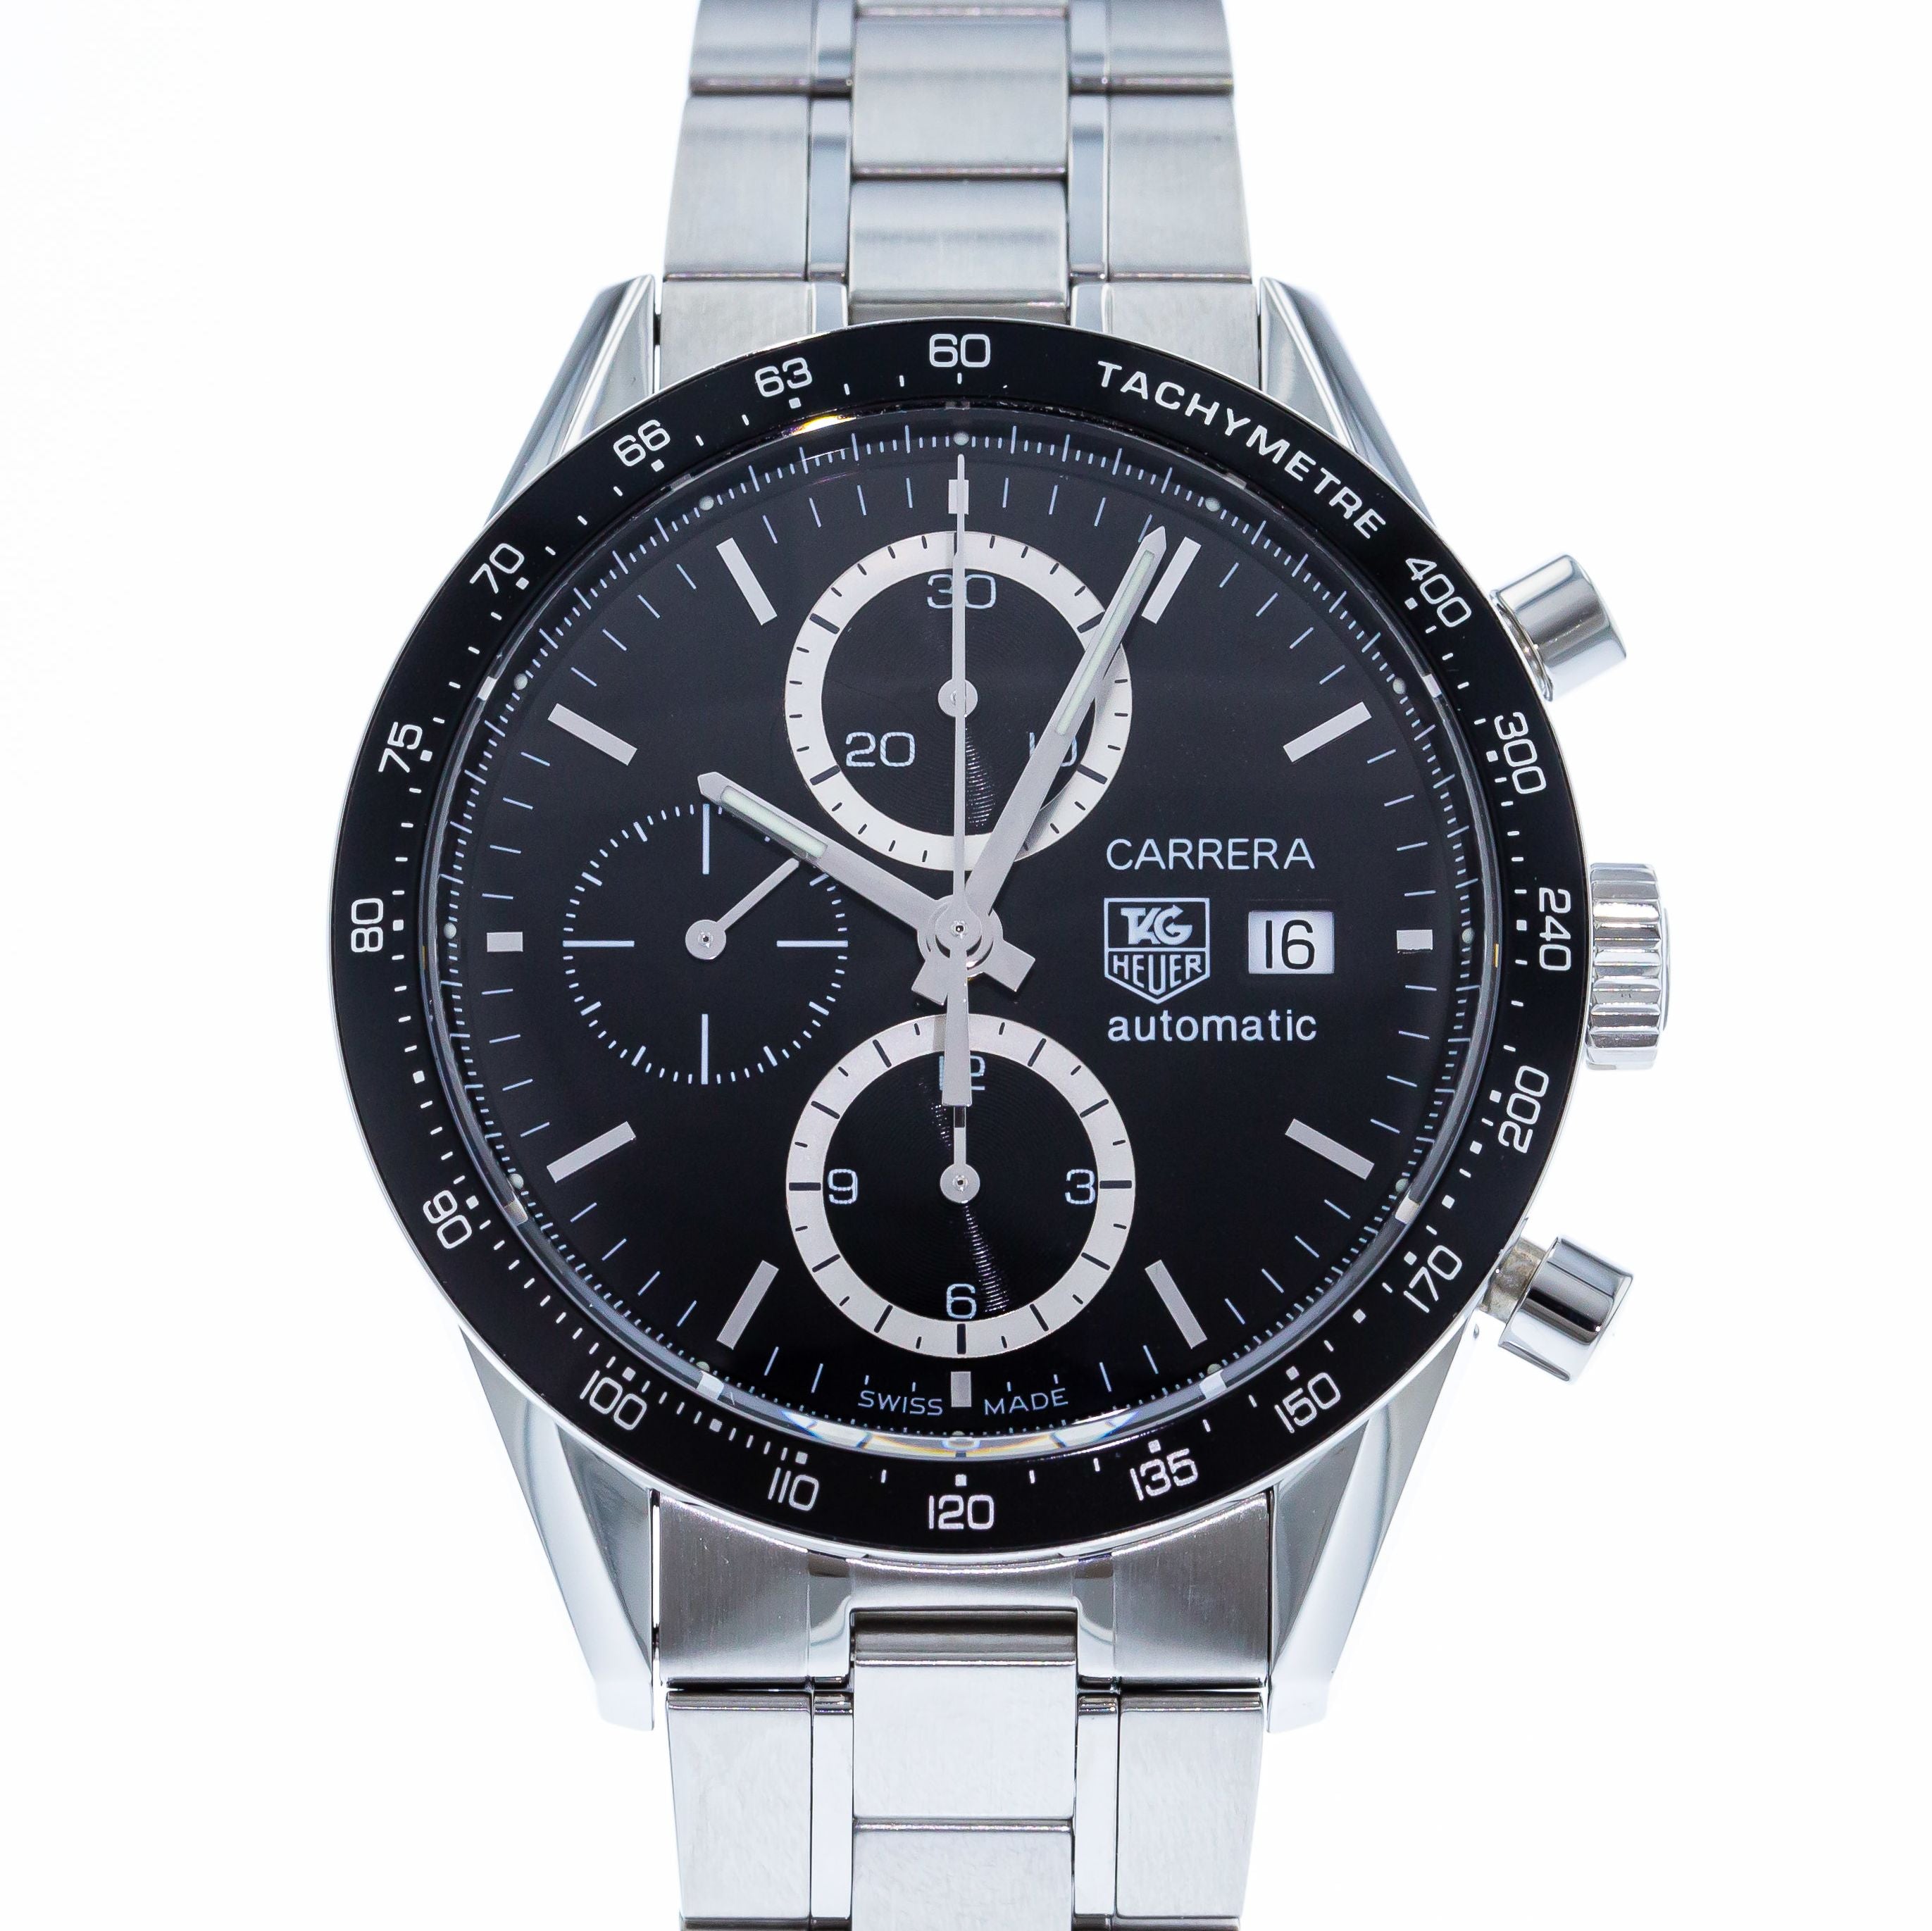 Authentic Used TAG Heuer Carrera Calibre 16 Chronograph CV2010 Watch  (10-10-TAG-67GZ2B)